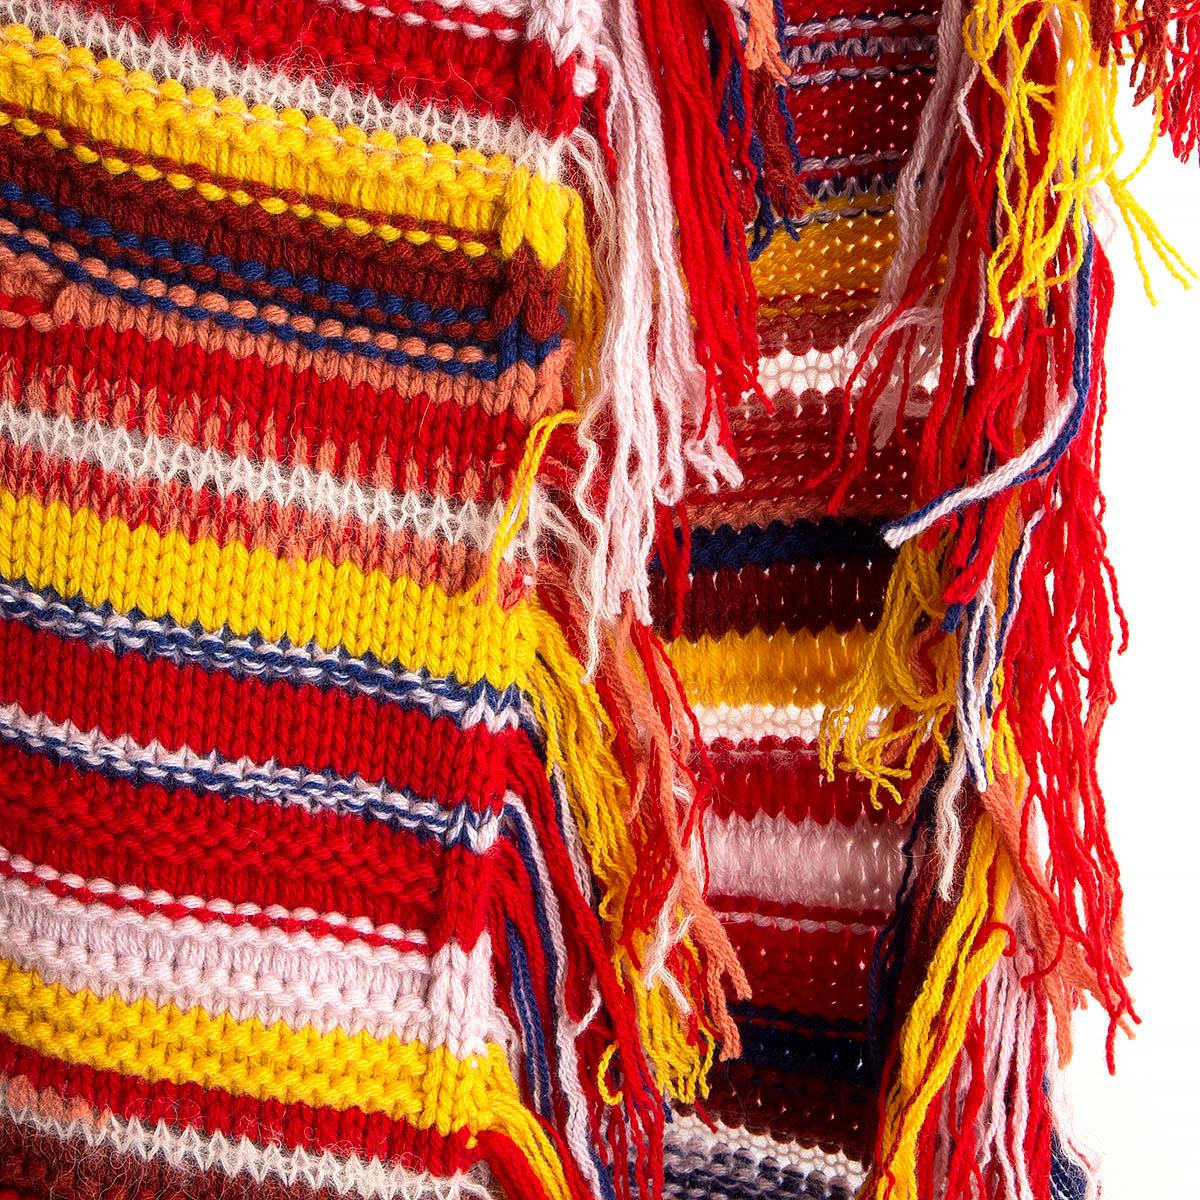 100% authentic Chloé striped long shawl in red, yellow, blue, salmon, baby pink and brown cashmere (93%), wool (5%), alpaca (1%) and polyamide (1%) panels with fringed trims. Has been worn and is in excellent condition. 

Measurements
Width	36cm